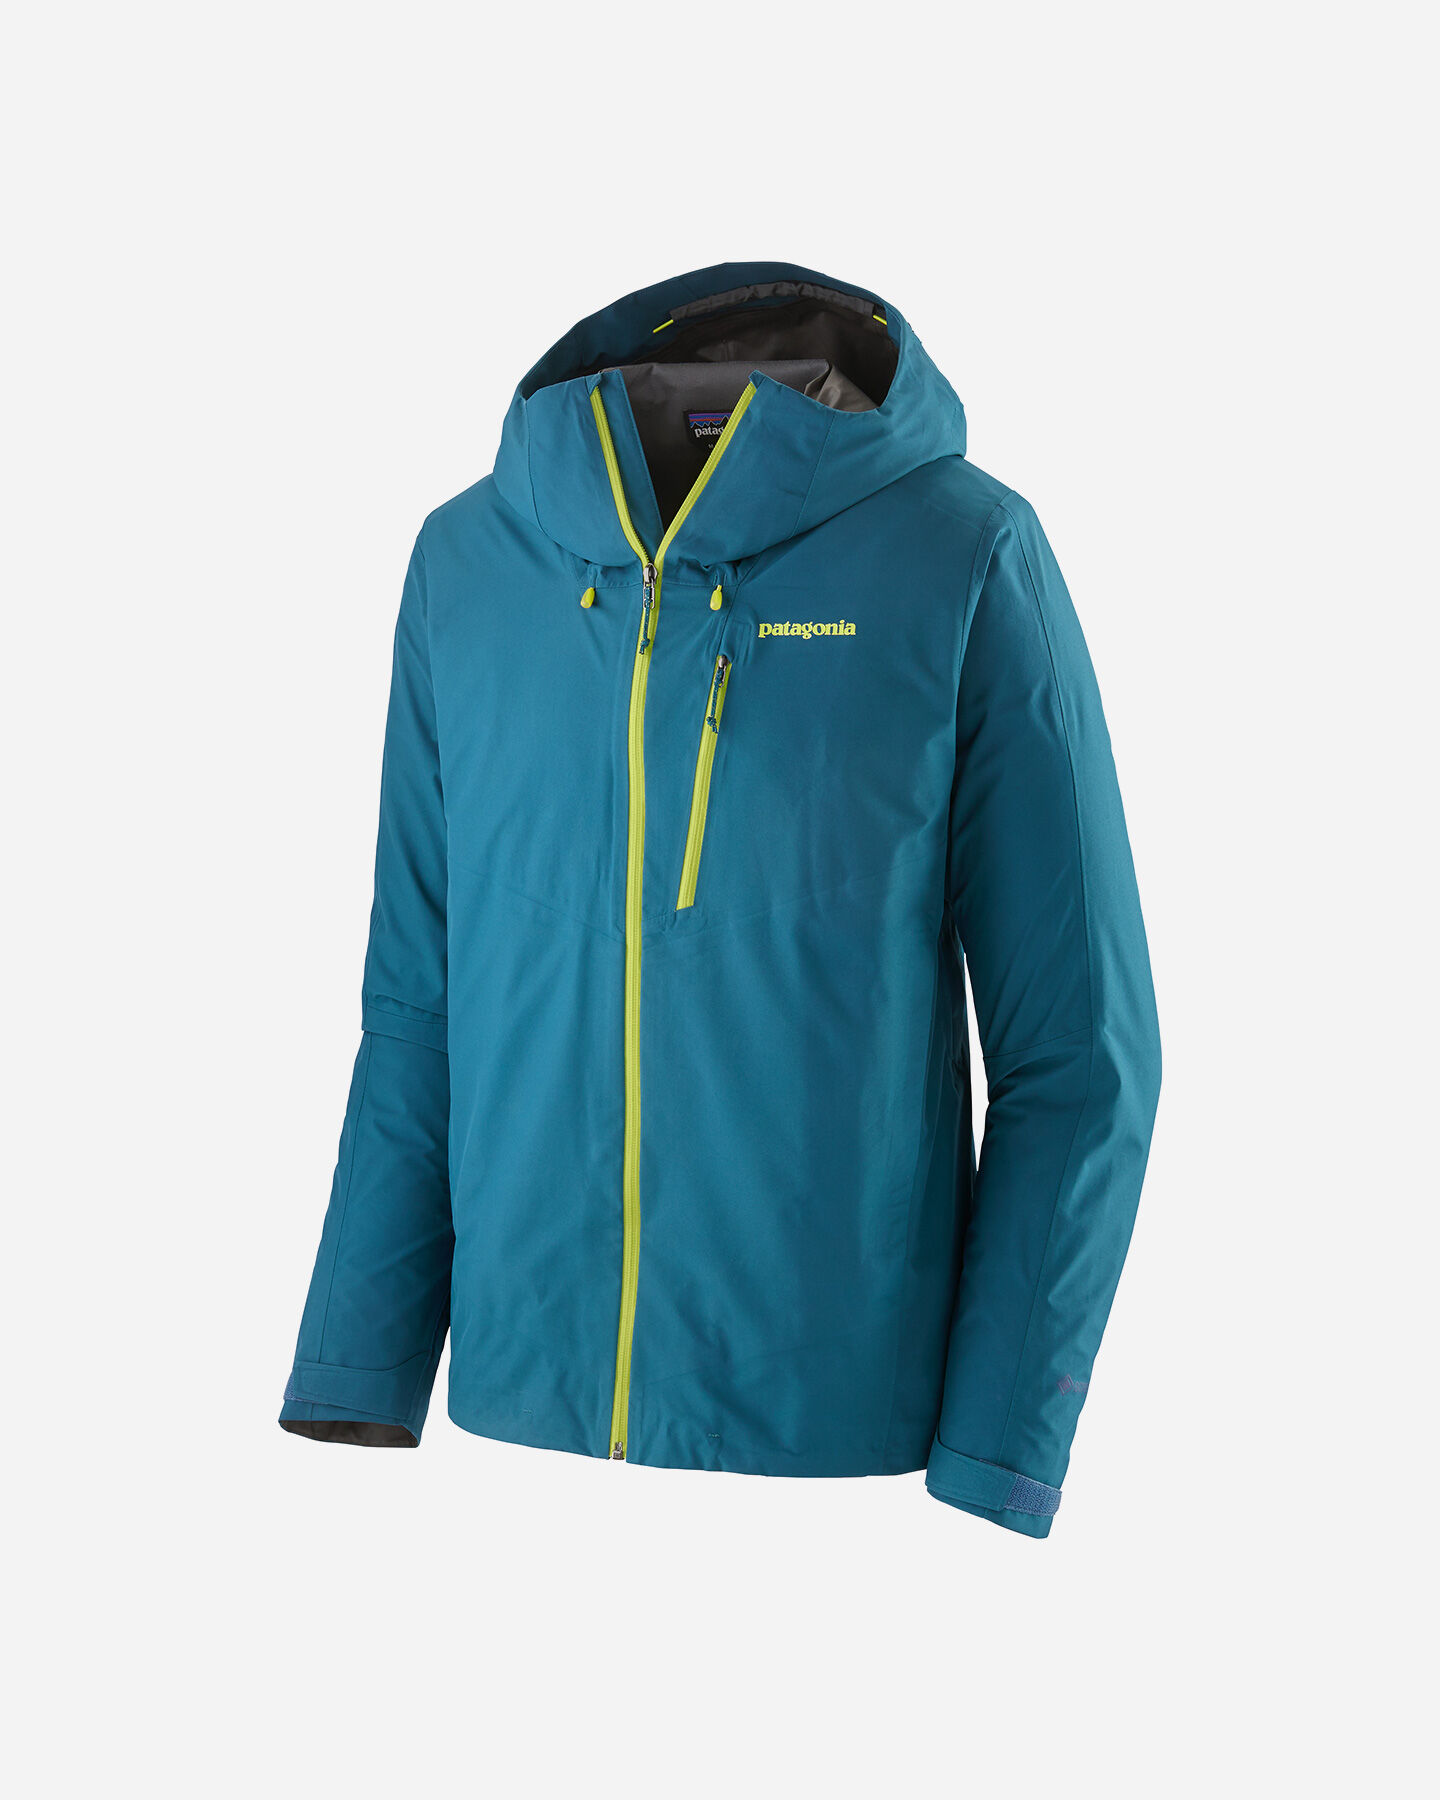  Giacca outdoor PATAGONIA CALCITE 2,5 GTX M S4089191|CTRB|S scatto 0